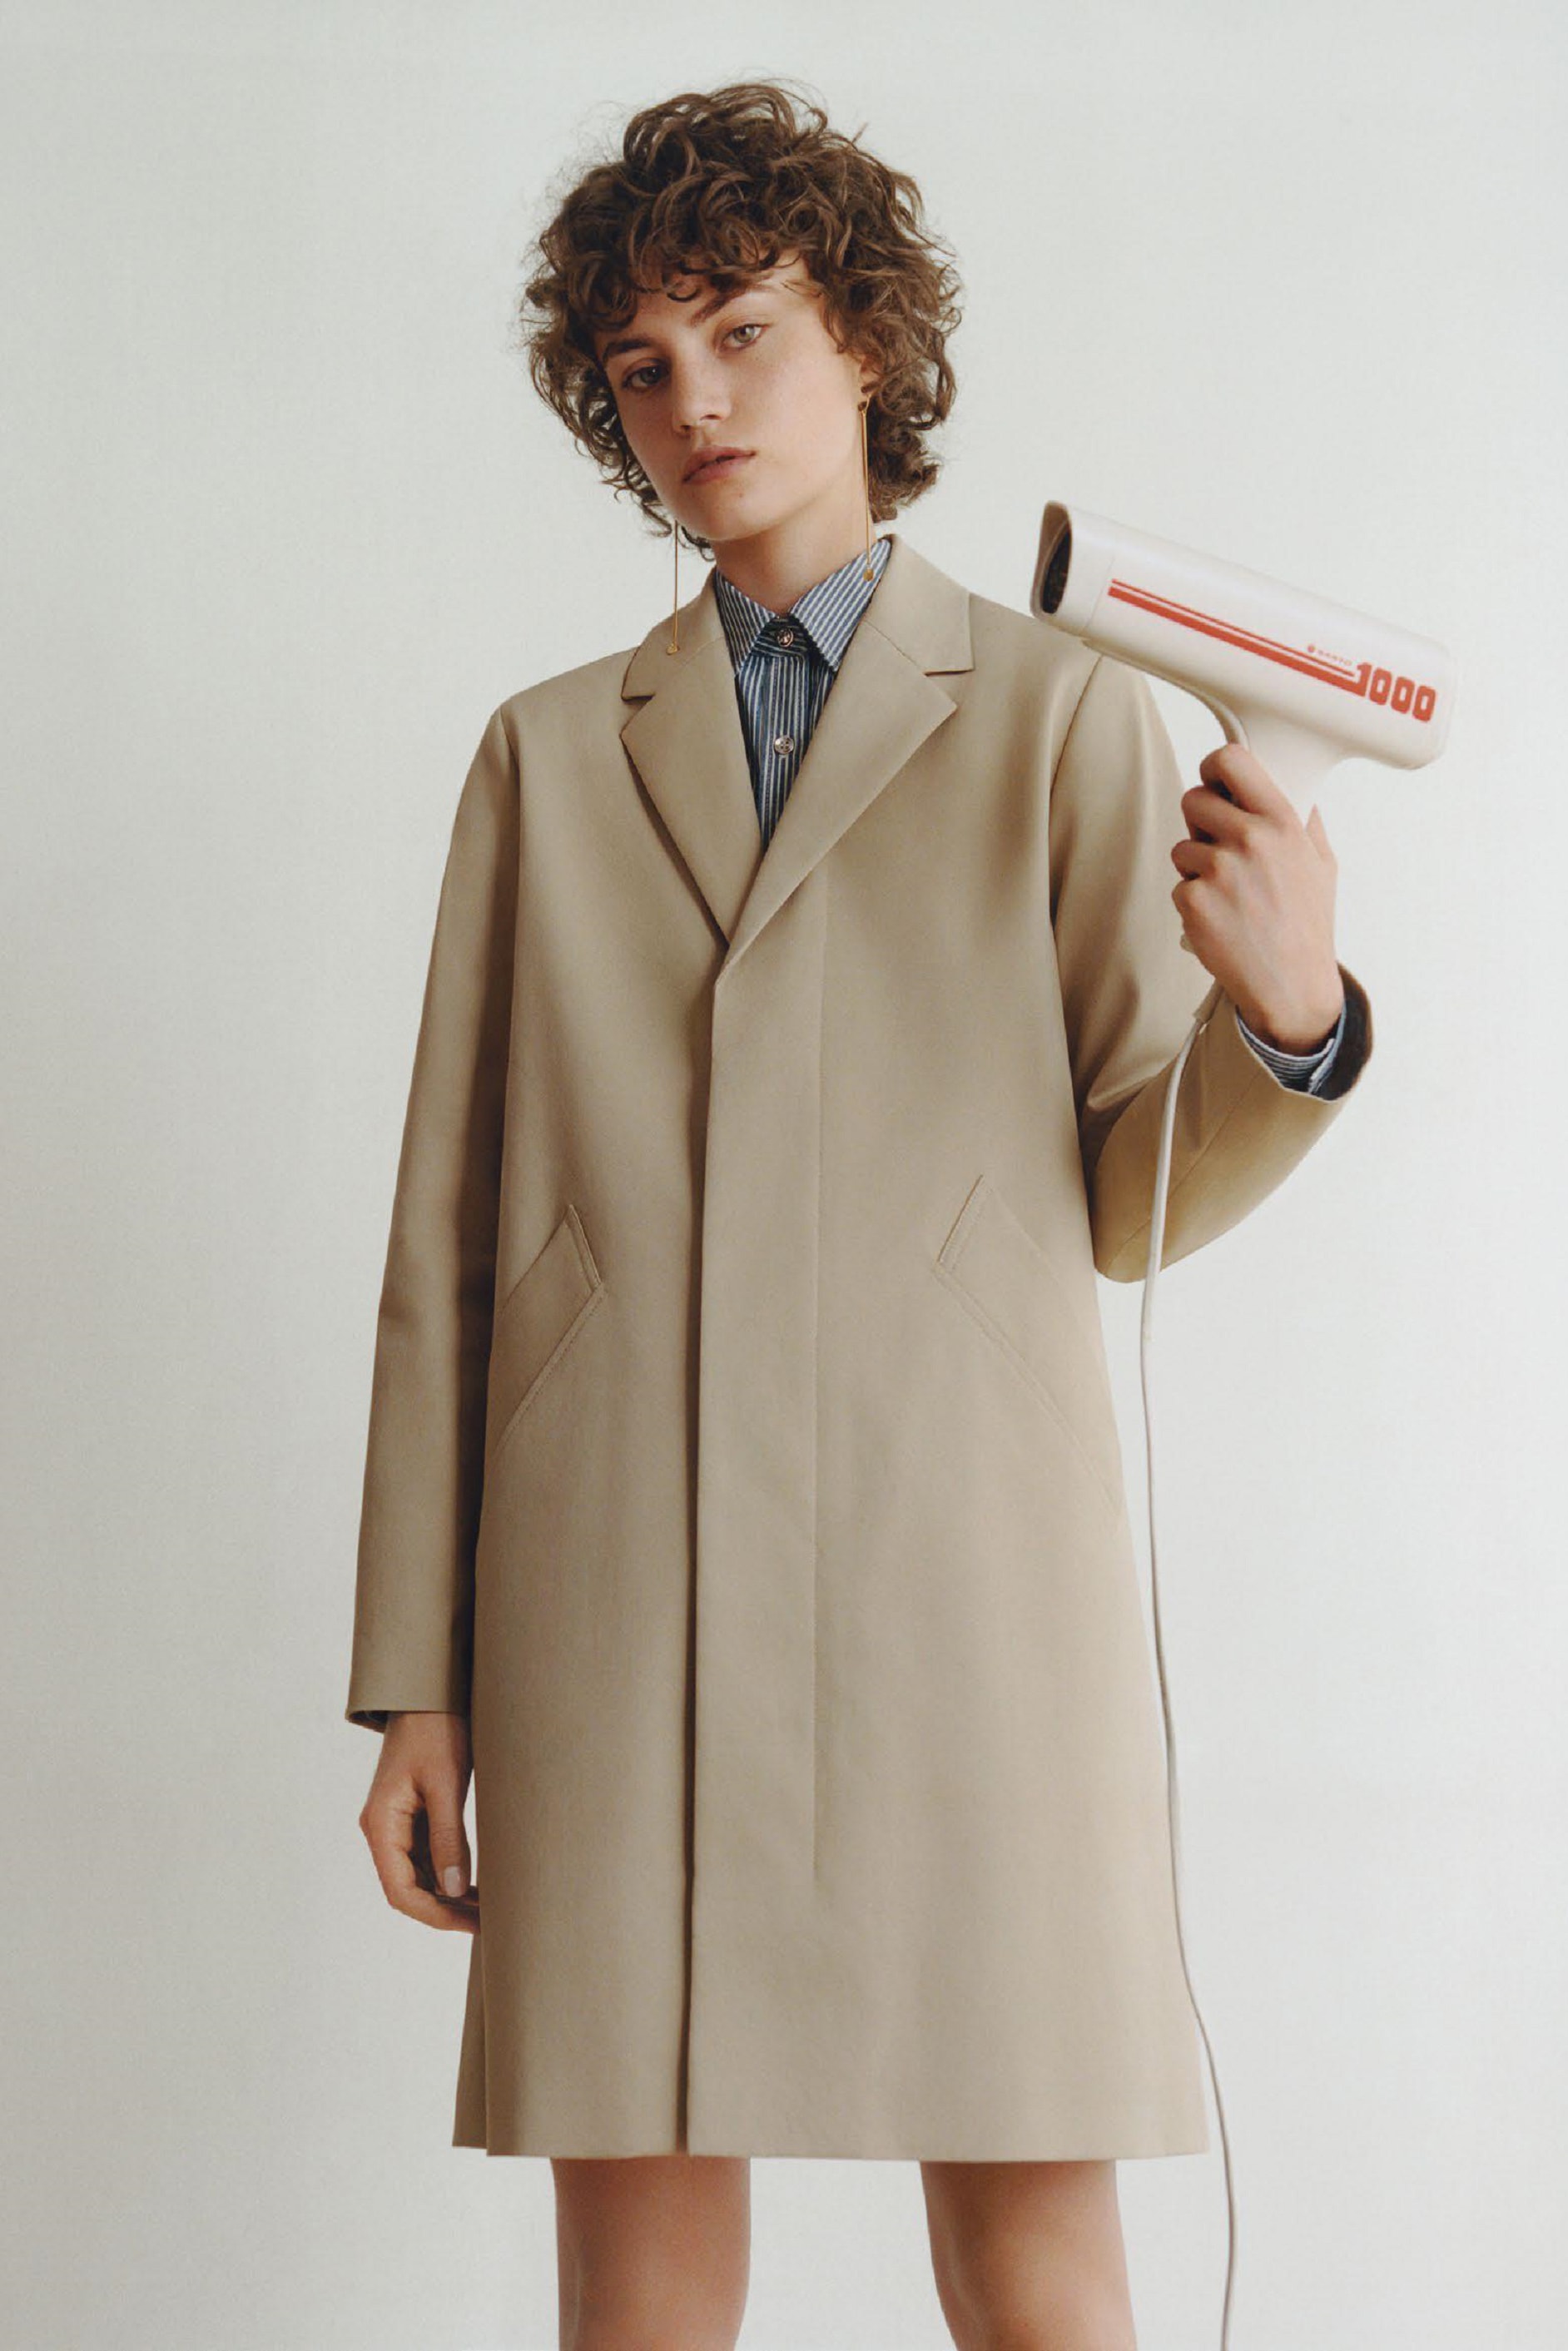 A.P.C. Spring 2018 Lookbook Collection Minimal Aesthetic Basic Staple Pieces